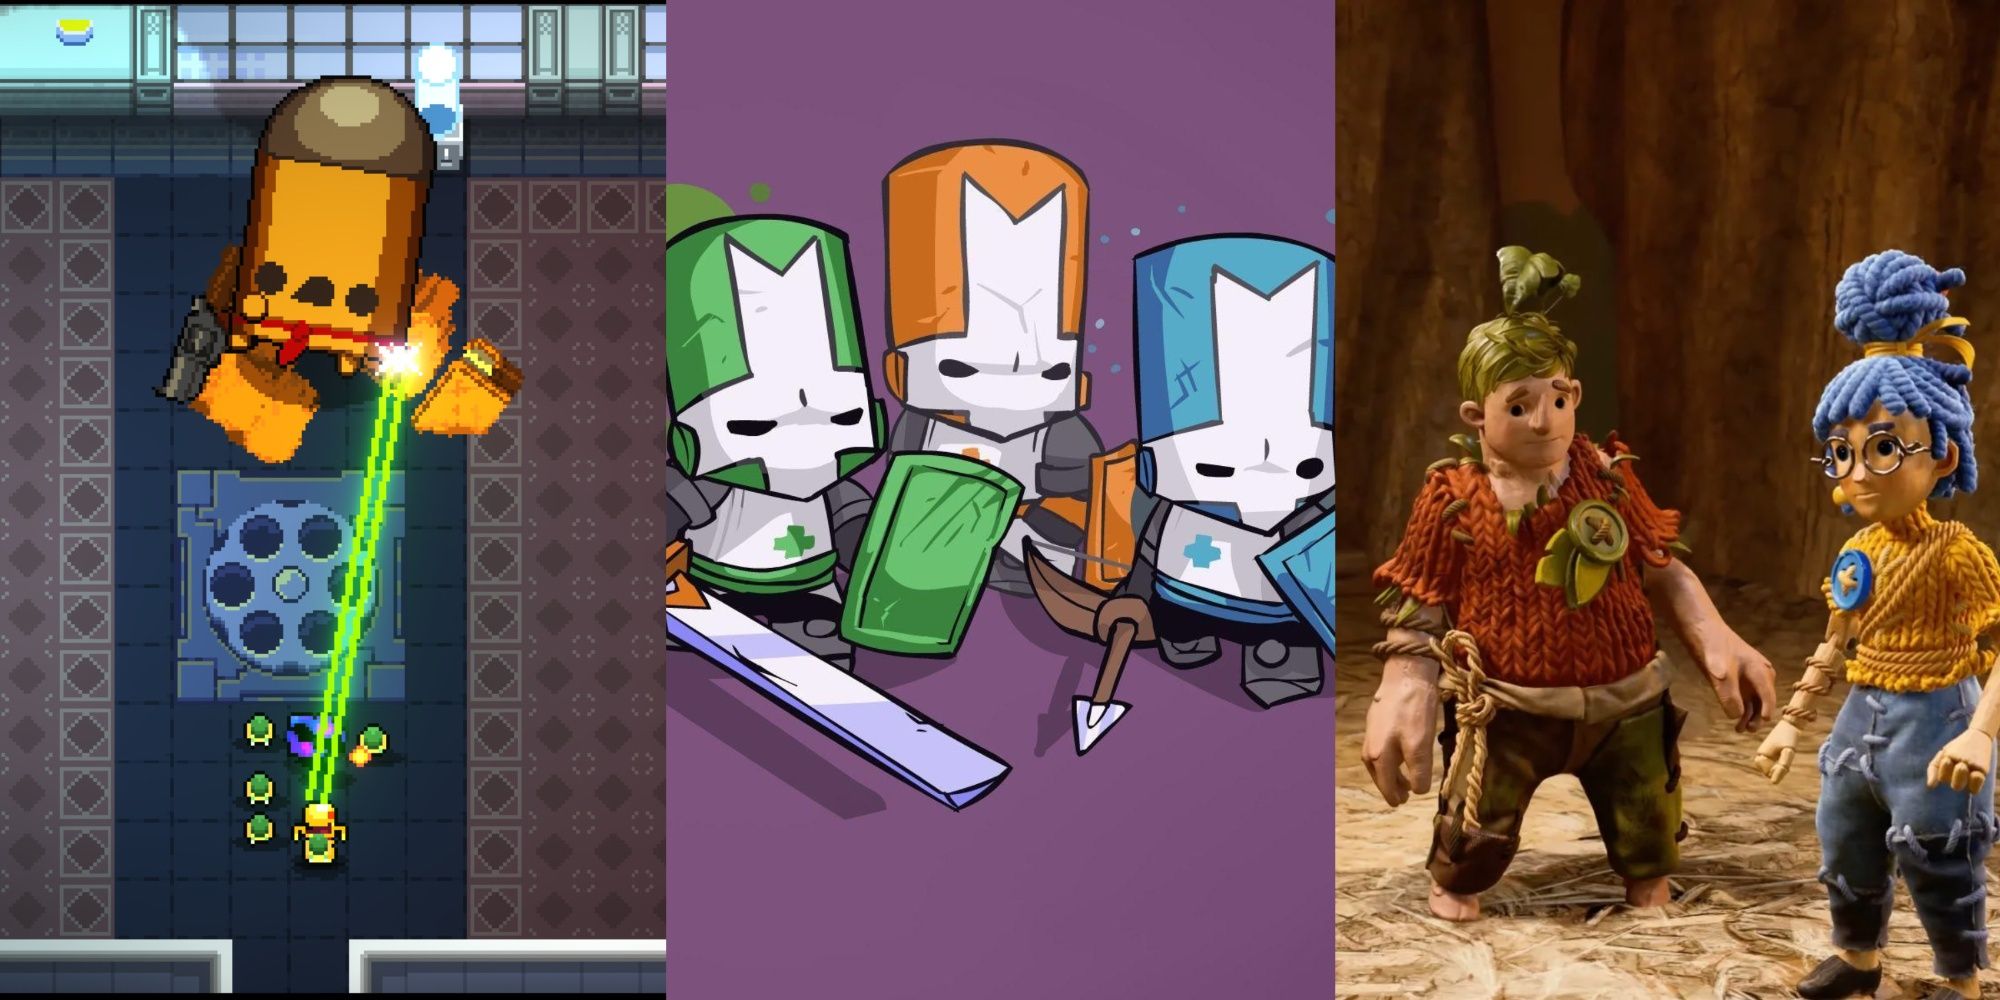 A Skeleton fights a giant bullet, characters from Castle Crashers, and Cody and May from It Takes Two